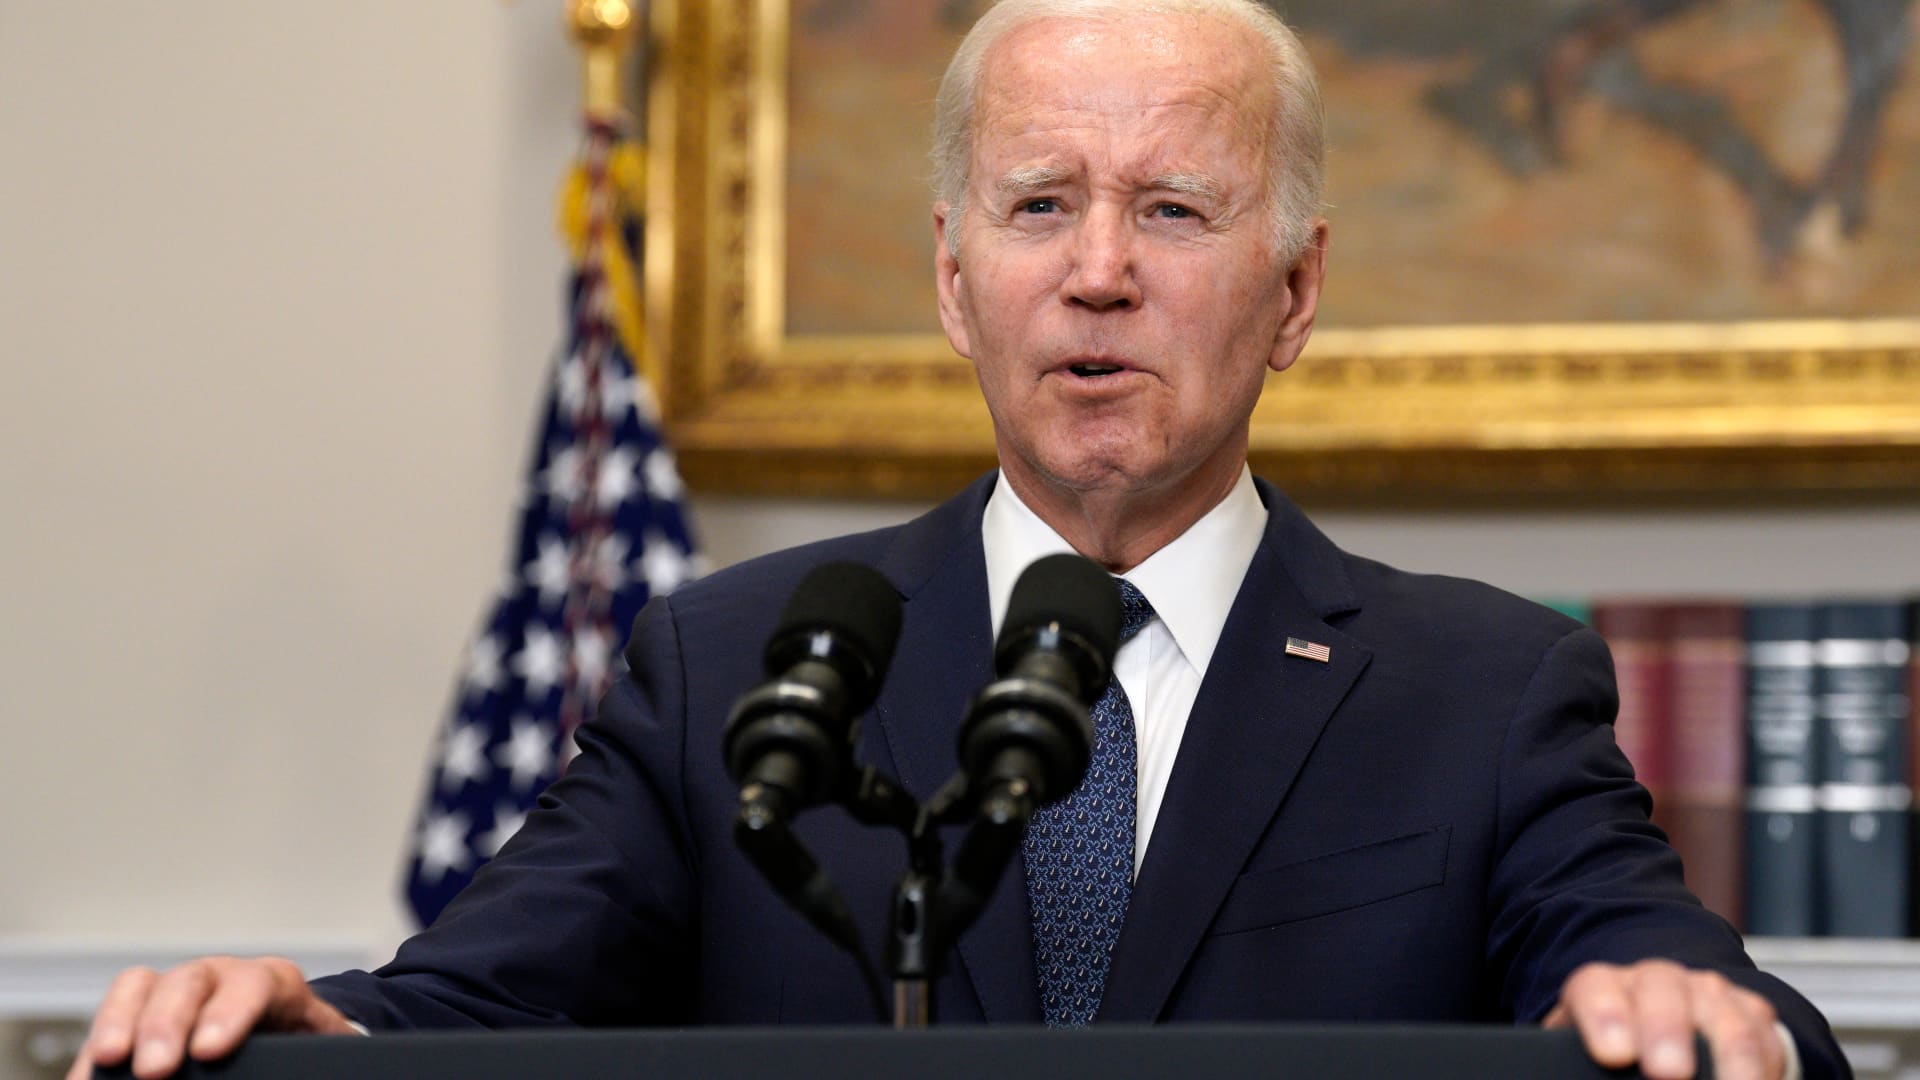 What’s in the debt ceiling deal struck by Biden and McCarthy?